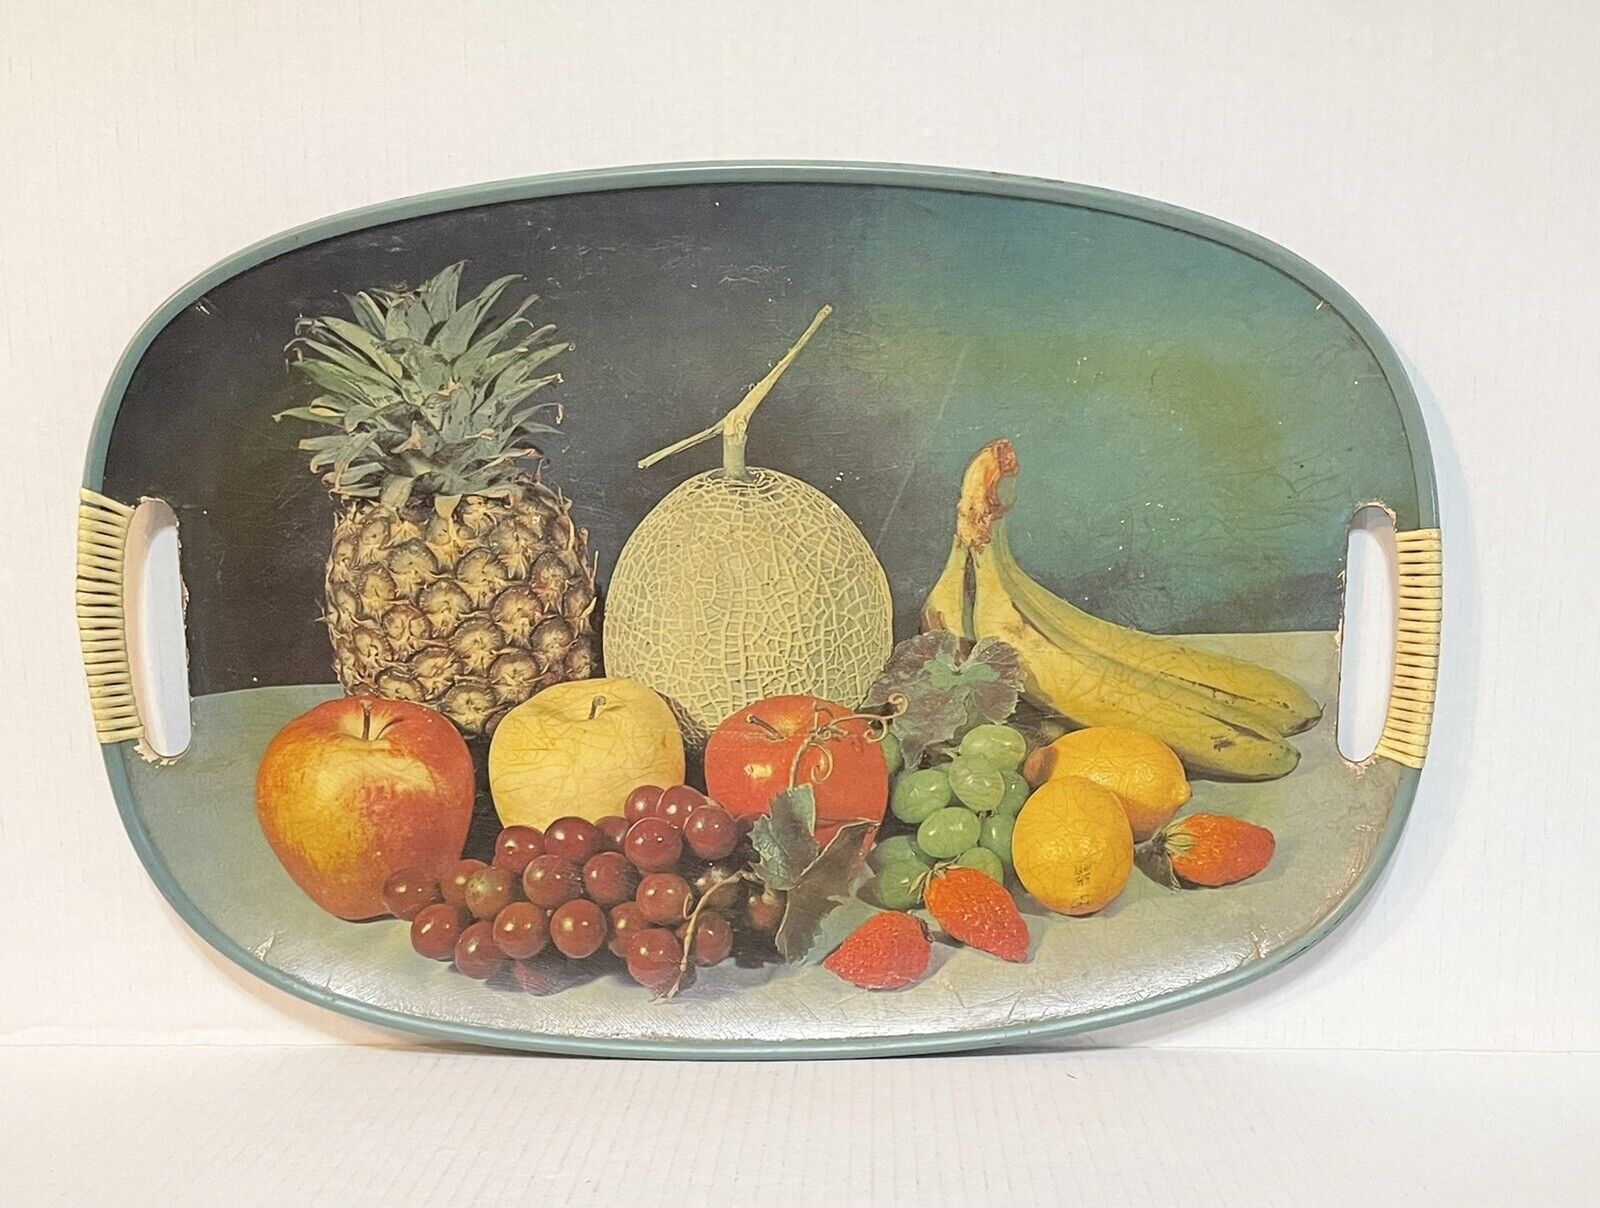 Vintage Everbright Lacquerware Souvenir Oval Serving Tray Fruit Tray Assortment